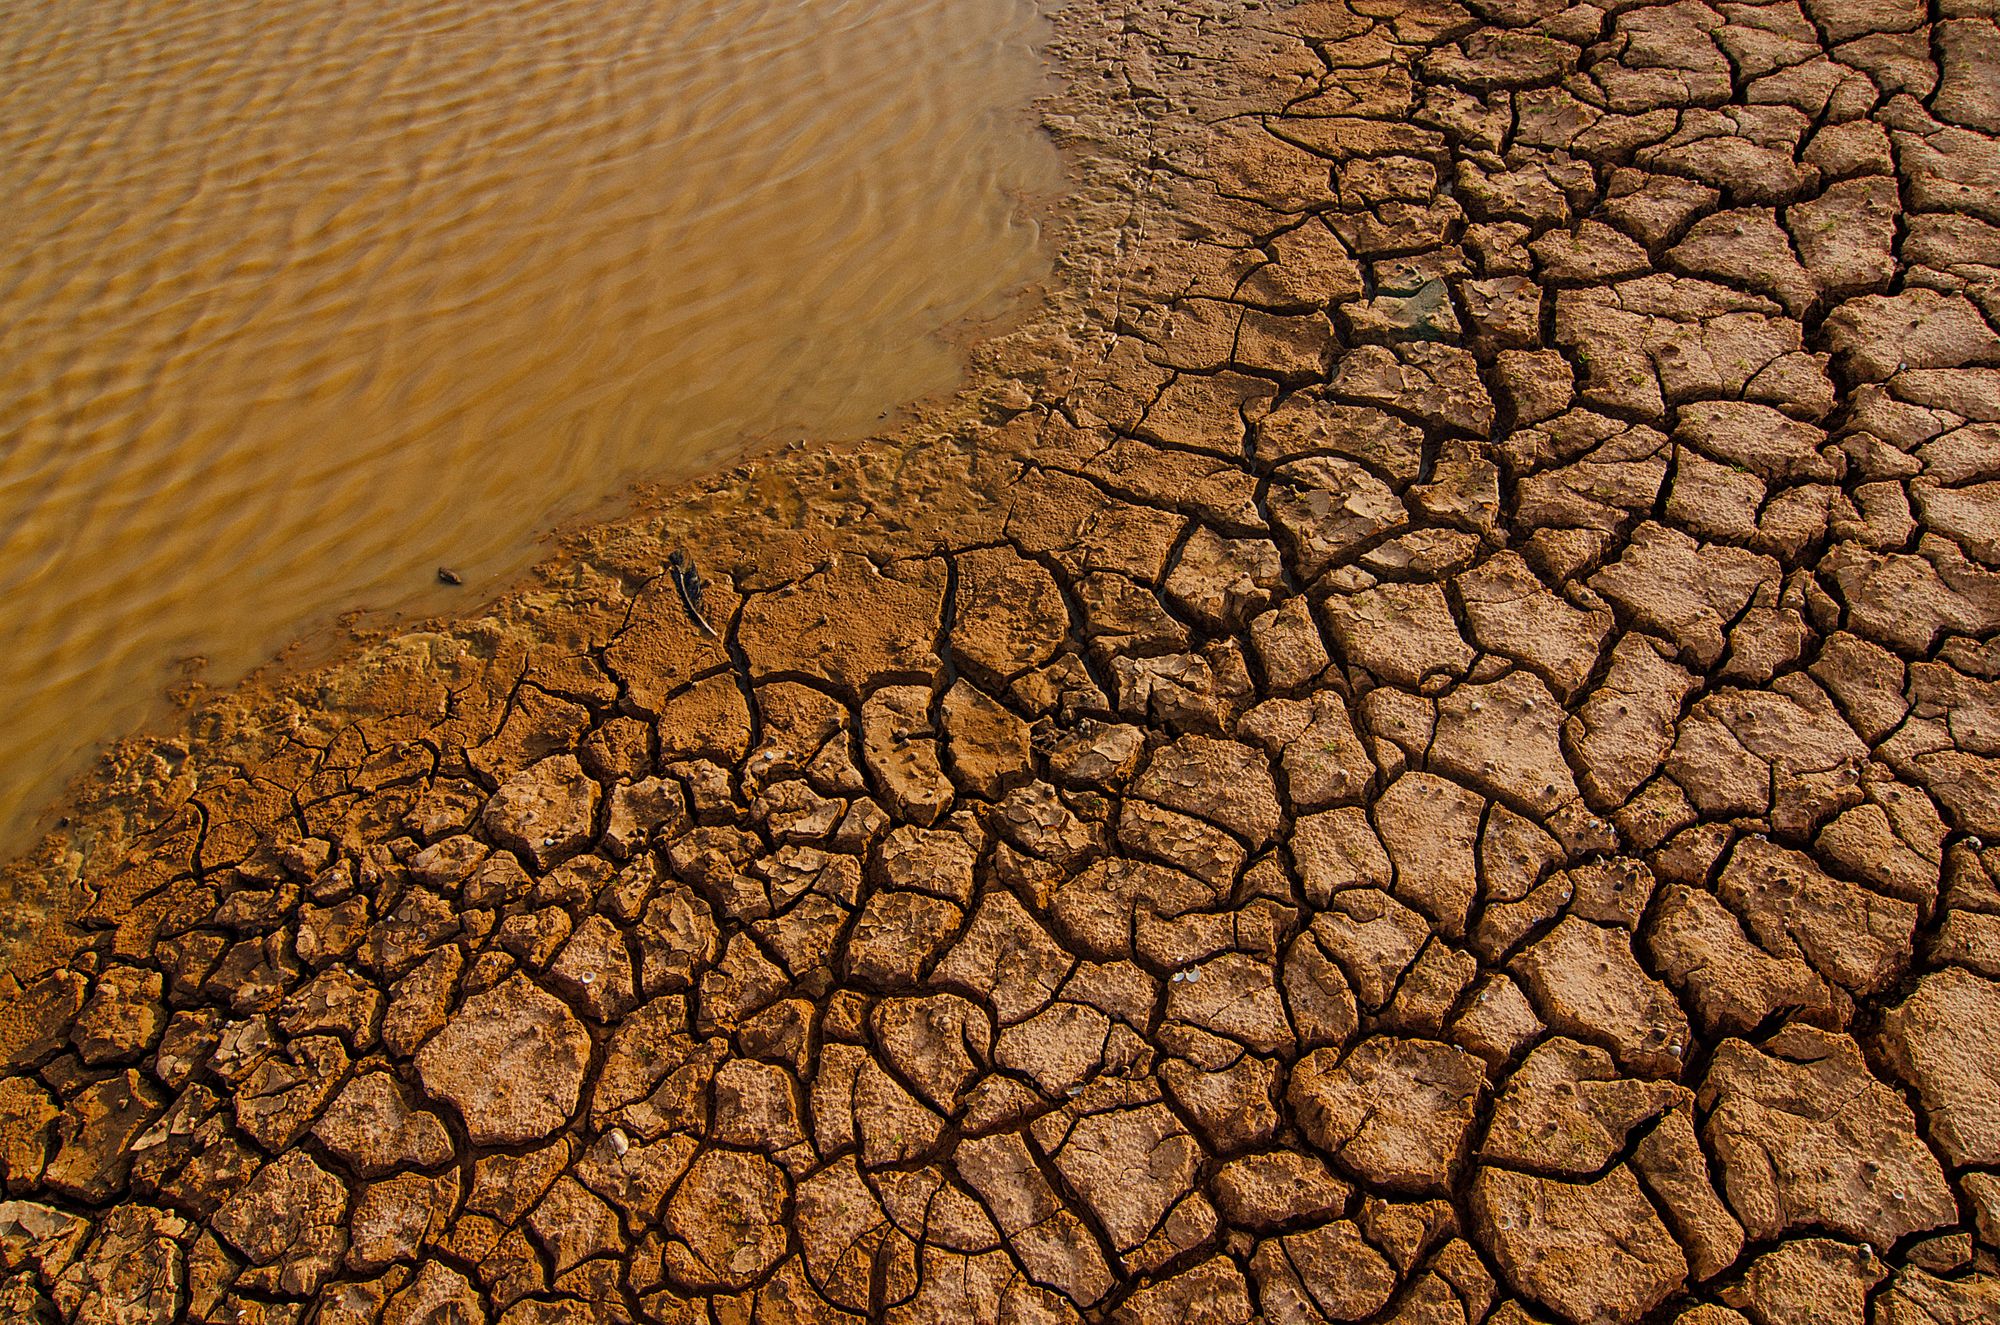 New drought risk assessment with Augurisk